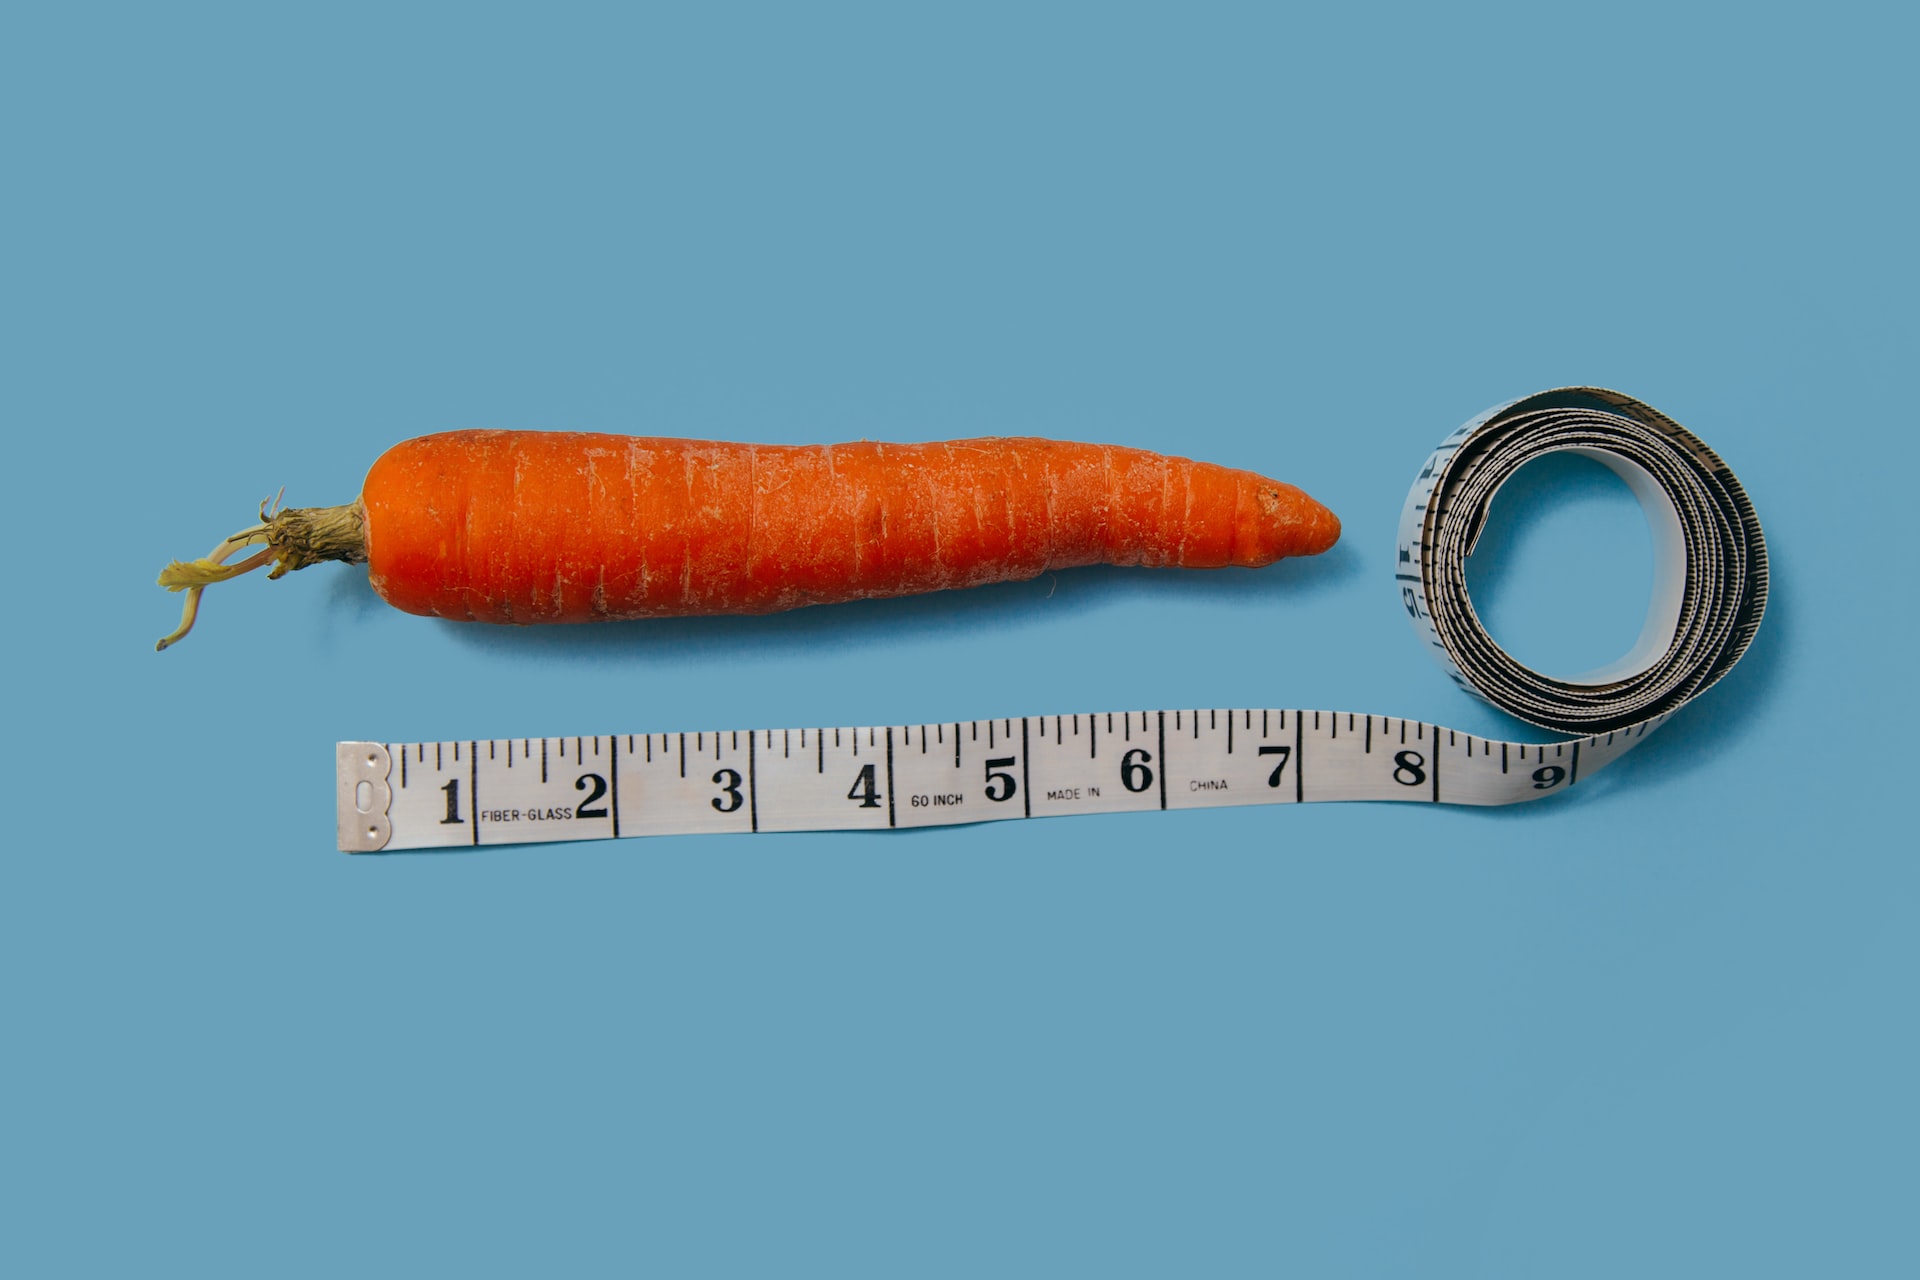 A carrot being measured